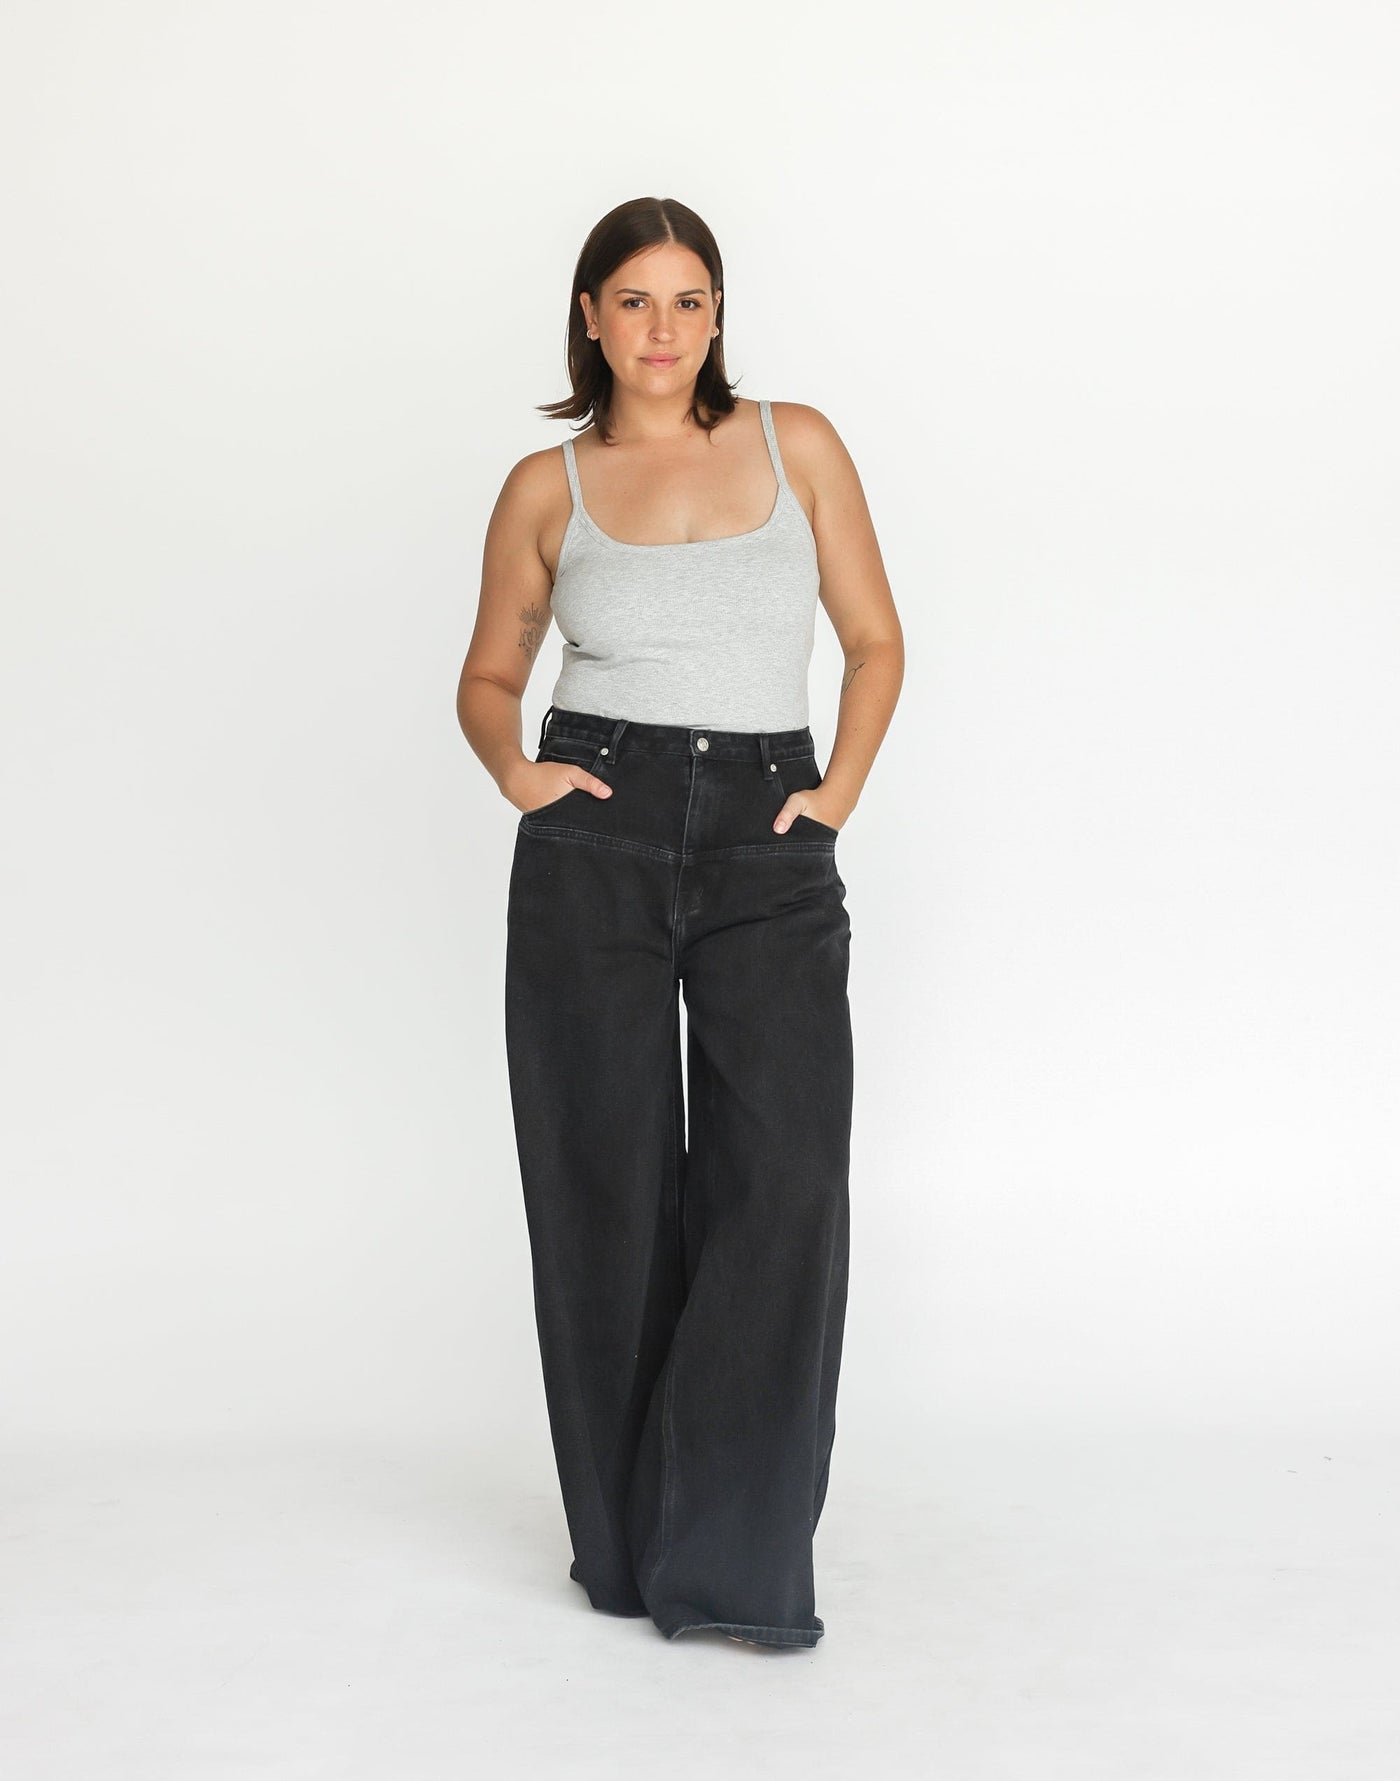 Aydin Jeans (Vintage Black) | CHARCOAL Exclusive - Front Panel Detail High Waisted Denim - Women's Pants - Charcoal Clothing